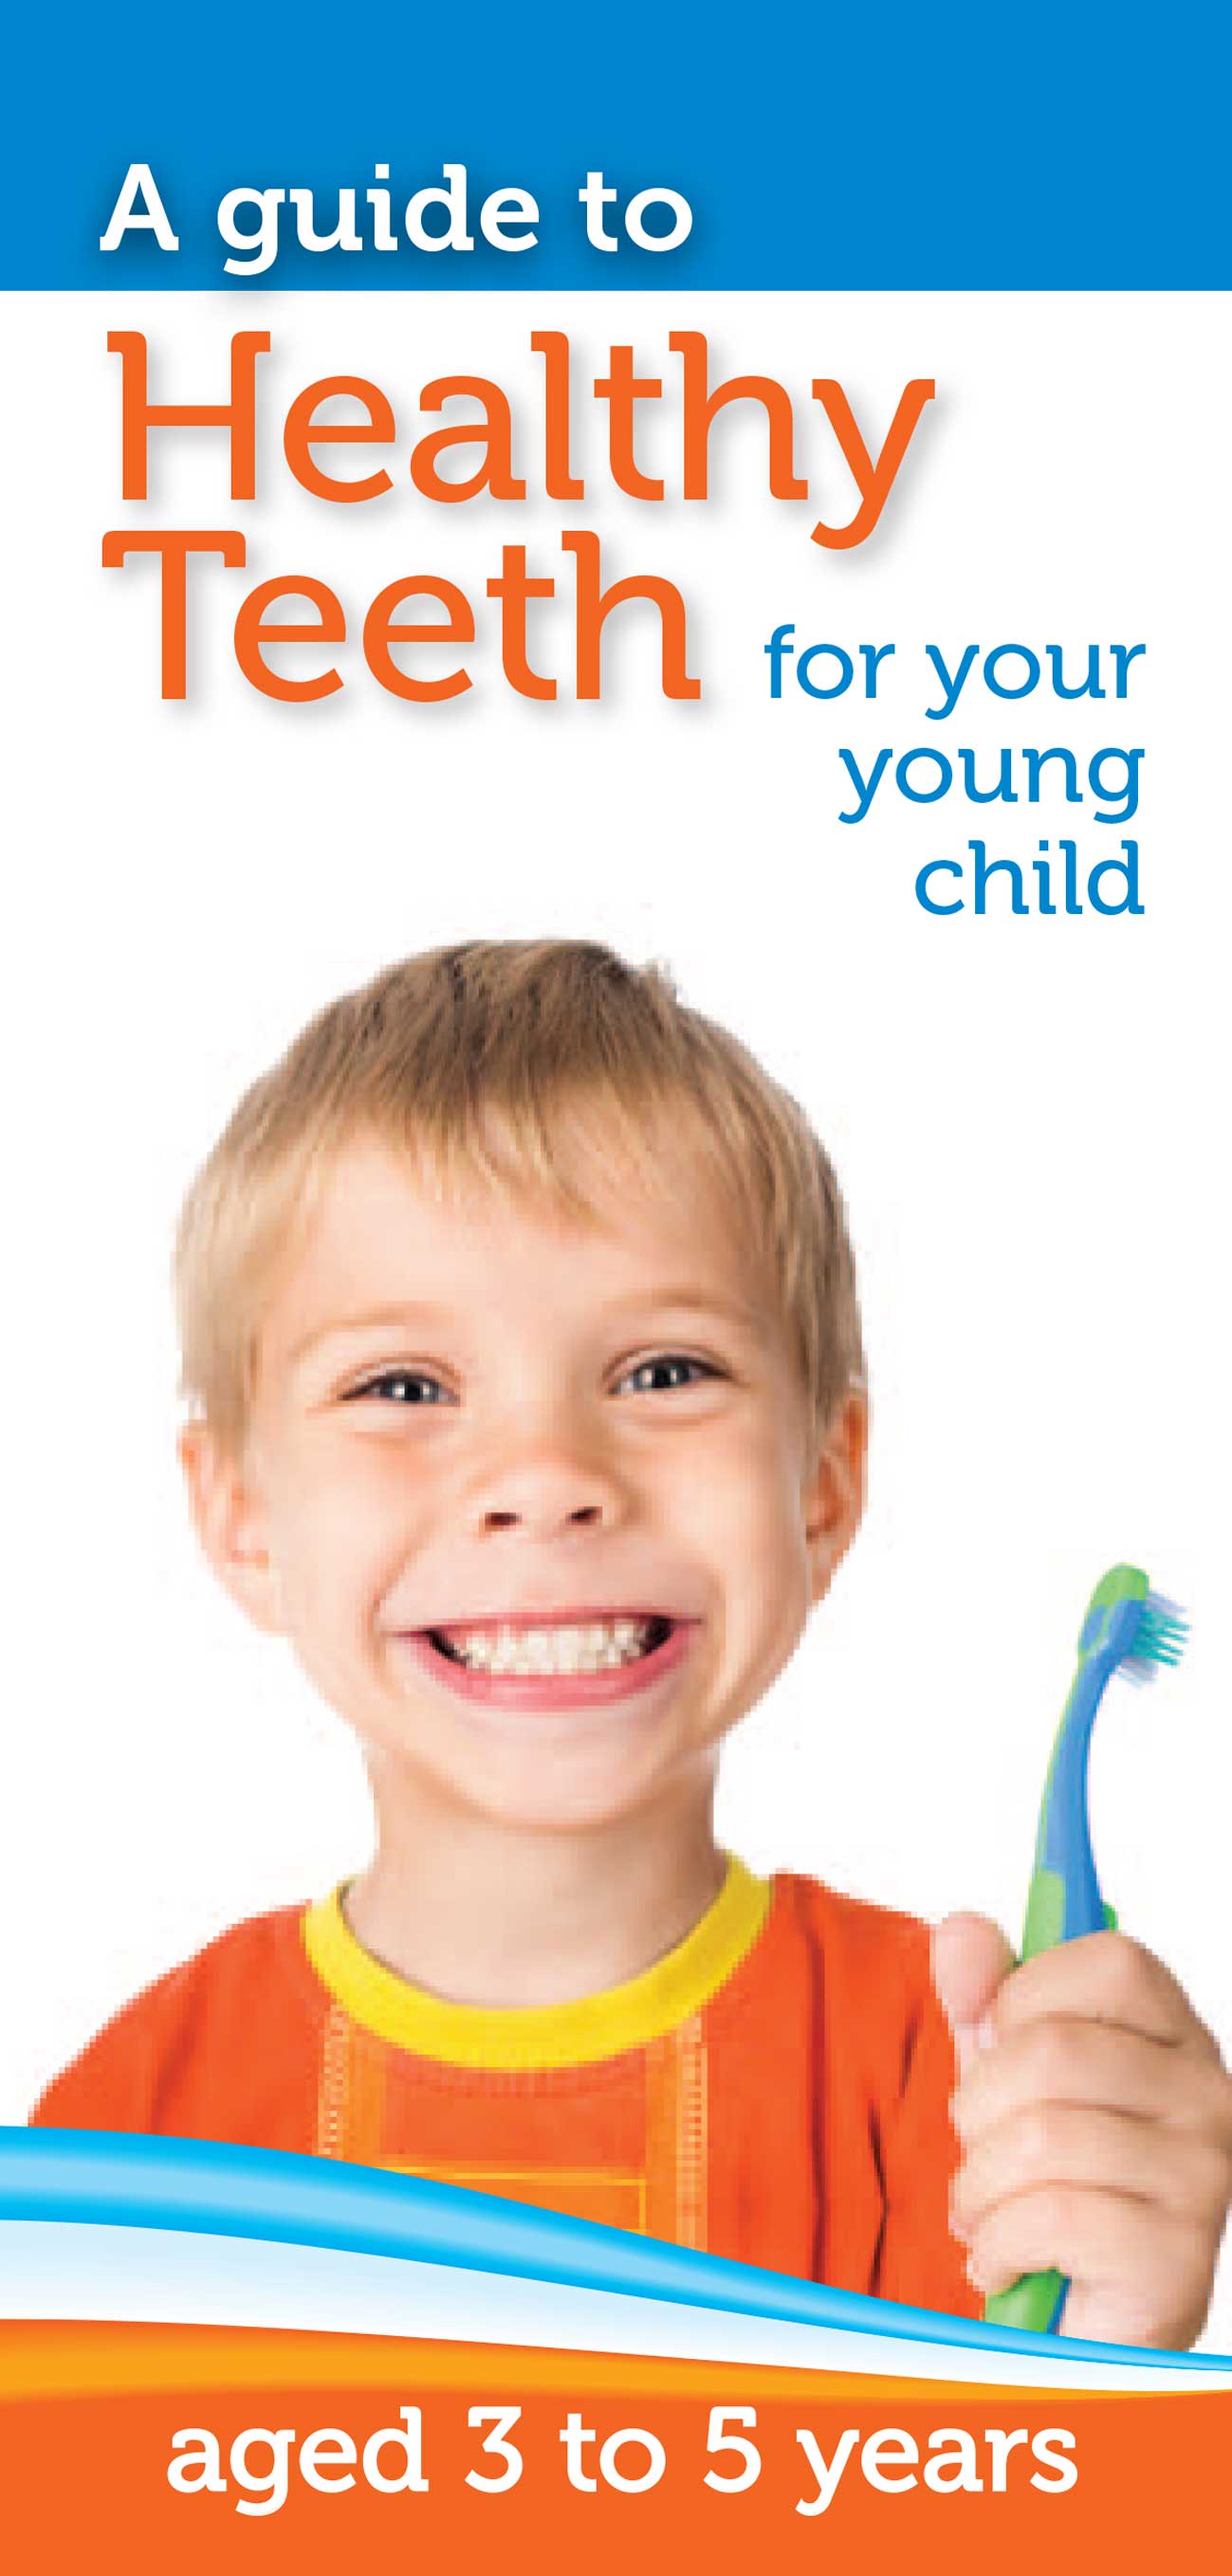 Healthy Teeth for your young child